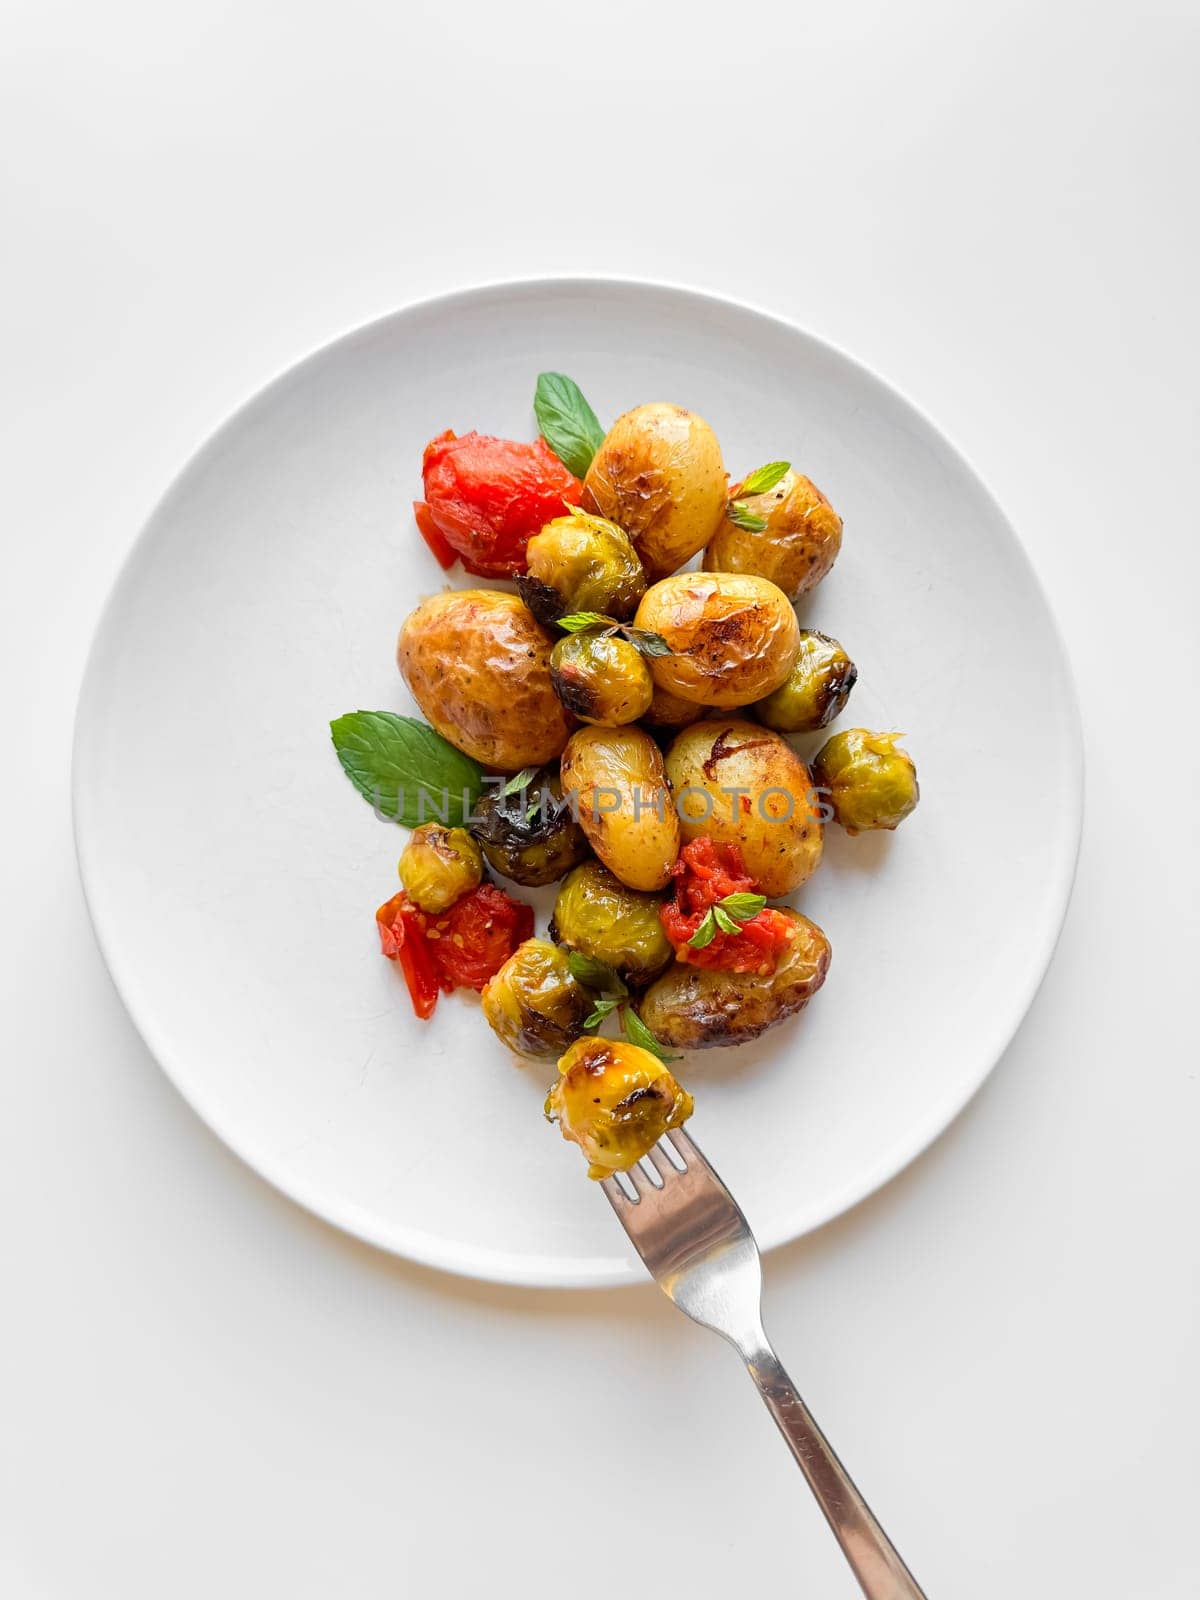 Roasted new potatoes and Brussels sprouts with cherry tomatoes and basil on white plate, healthy eating concept for weight loss. High quality photo